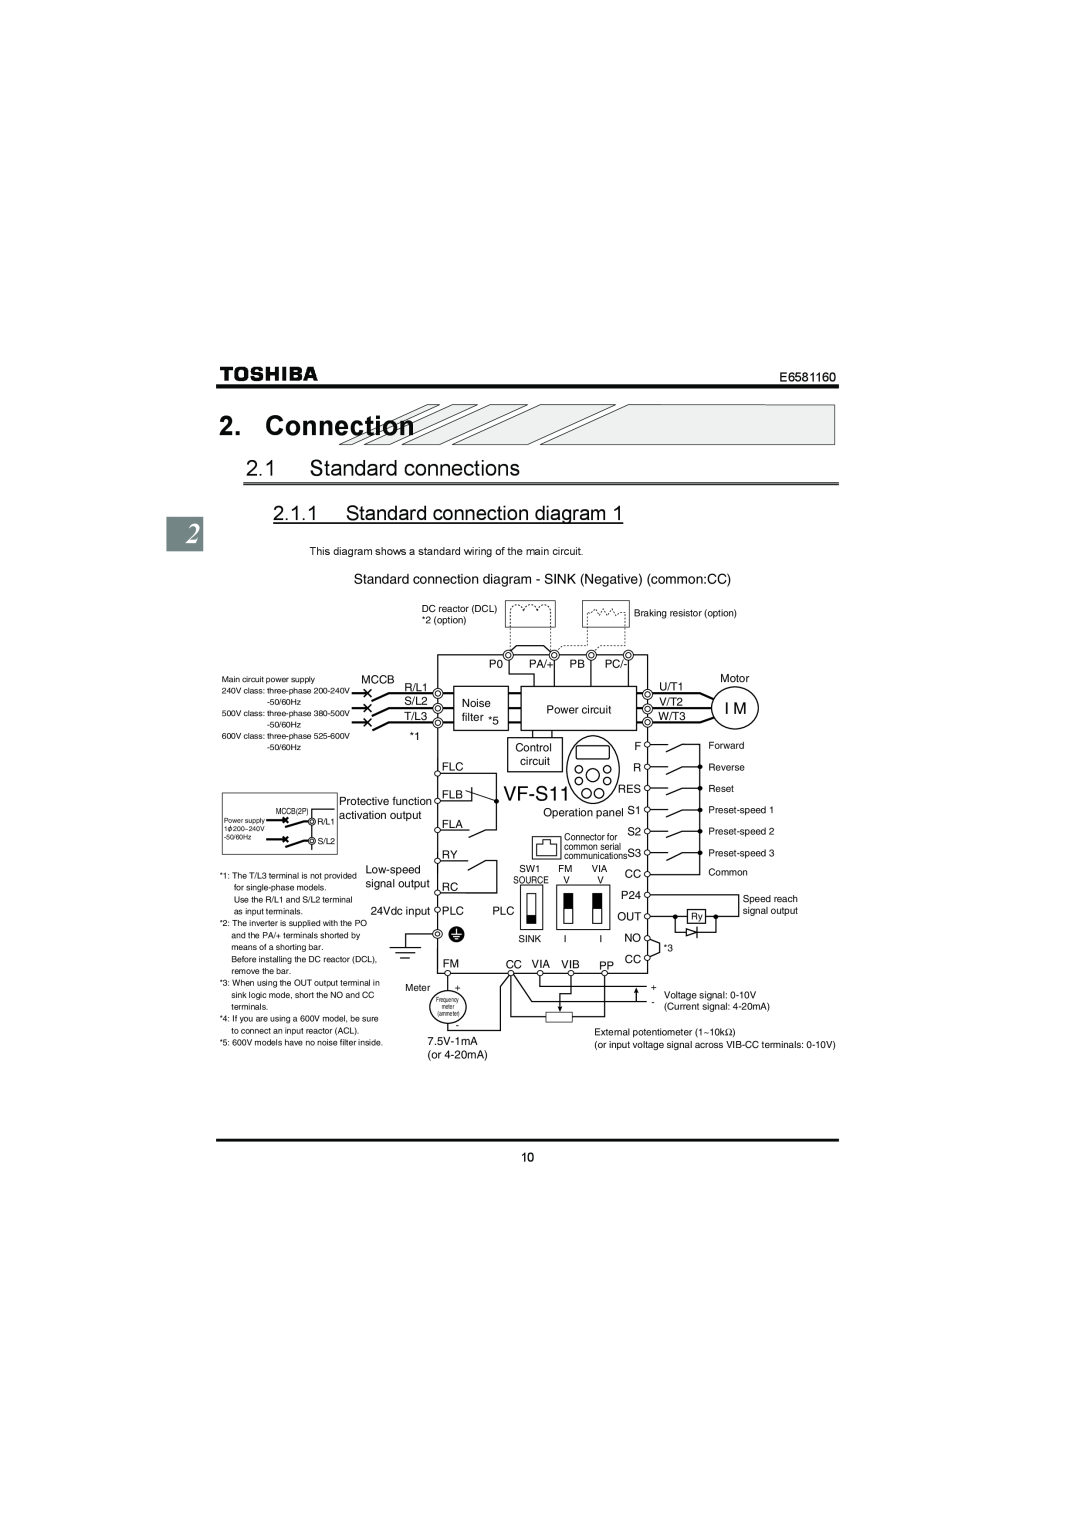 Toshiba VF-S11 manual Connection, Standard connections, Standard connection diagram, E6581160 